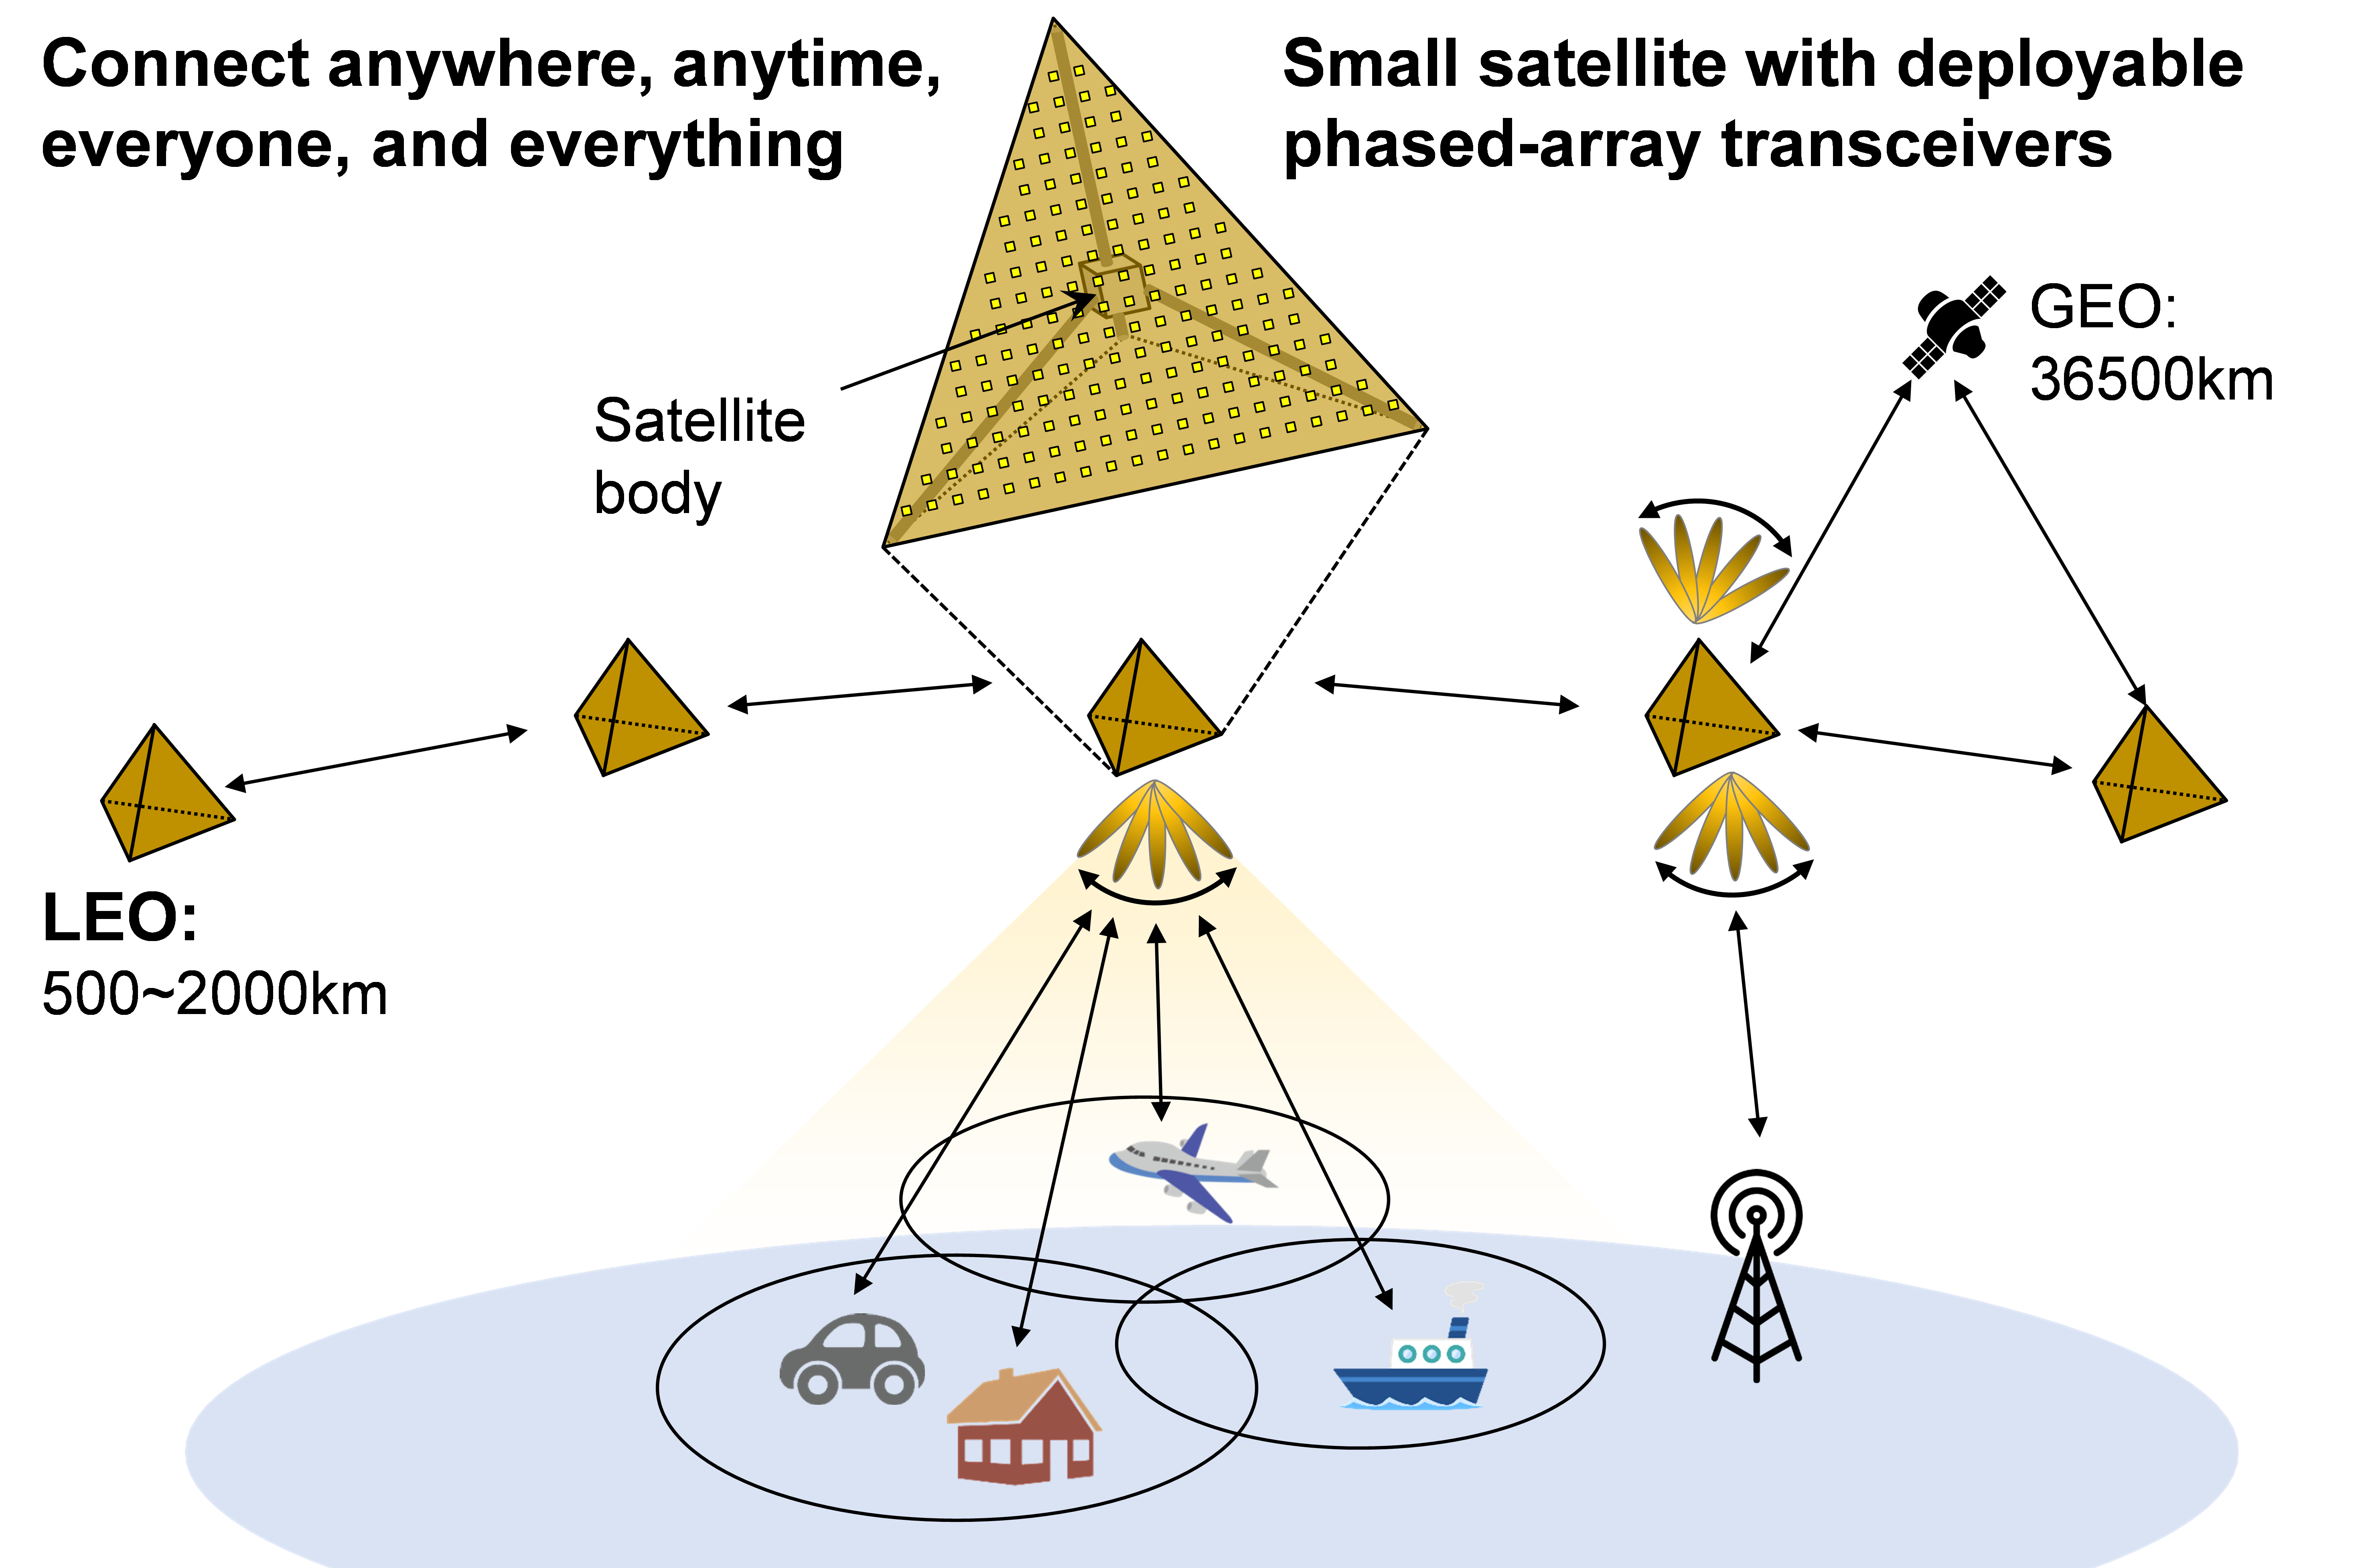 Concept of small satellite constellation for future 6G networks